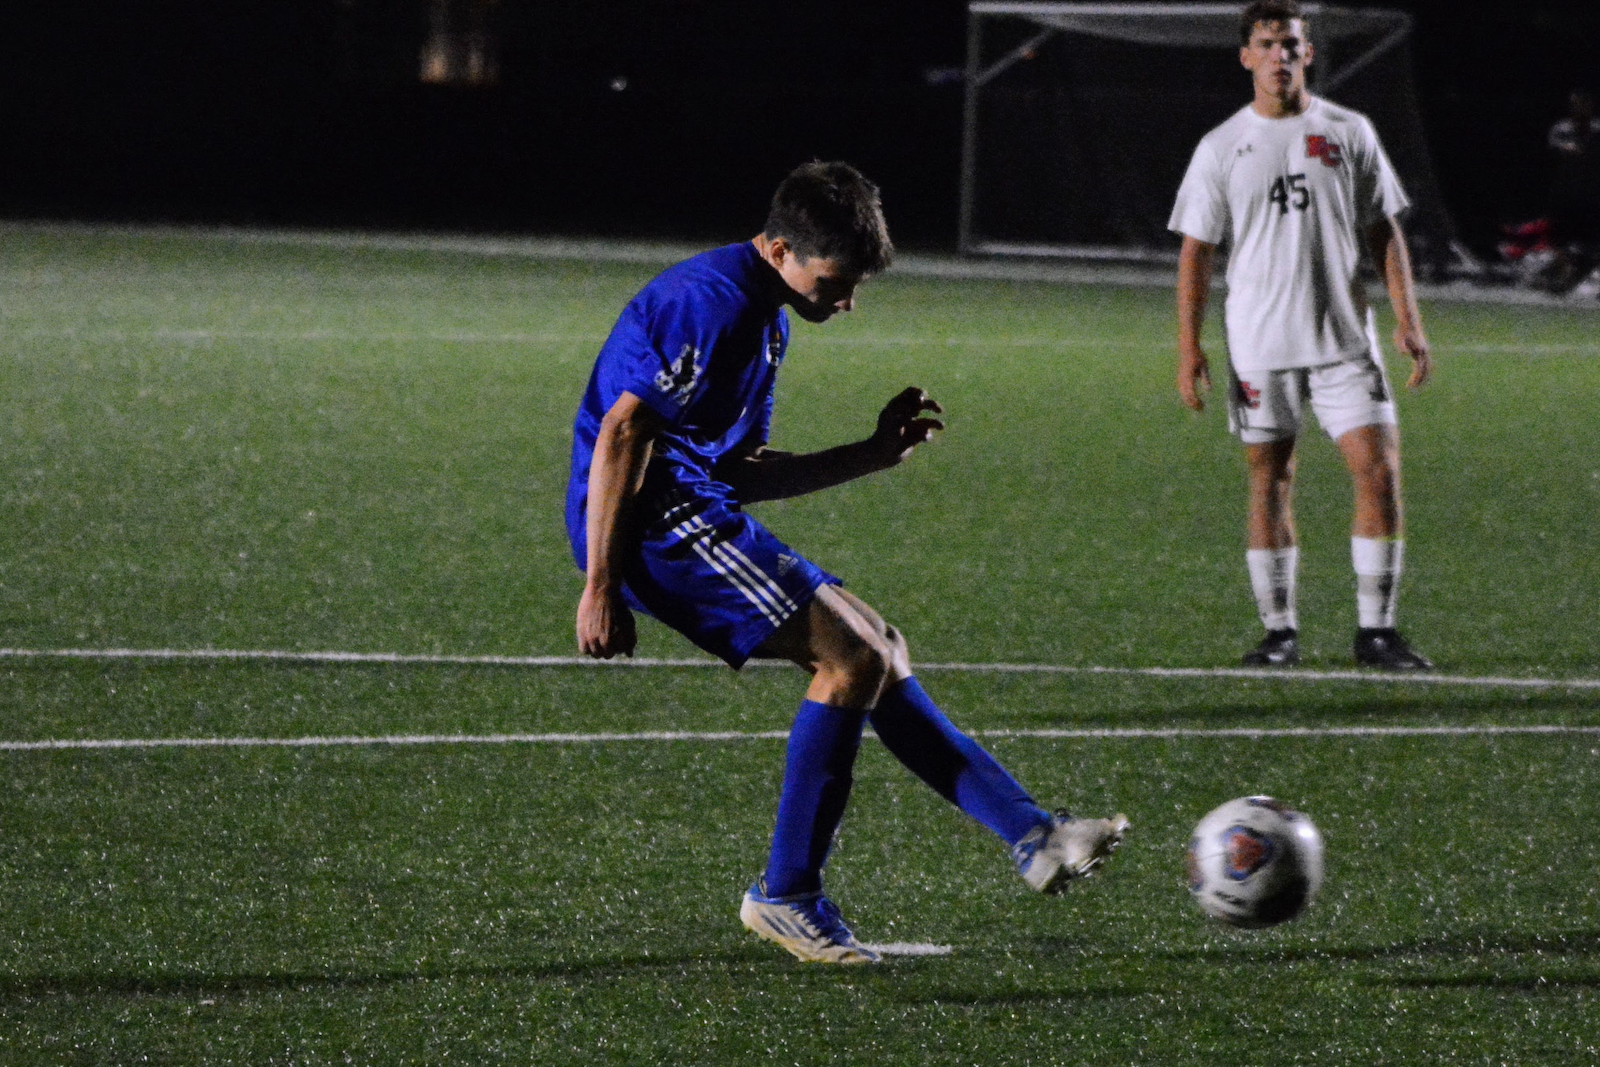 Late PK propels Bull Dogs past East Central in boys soccer cover photo